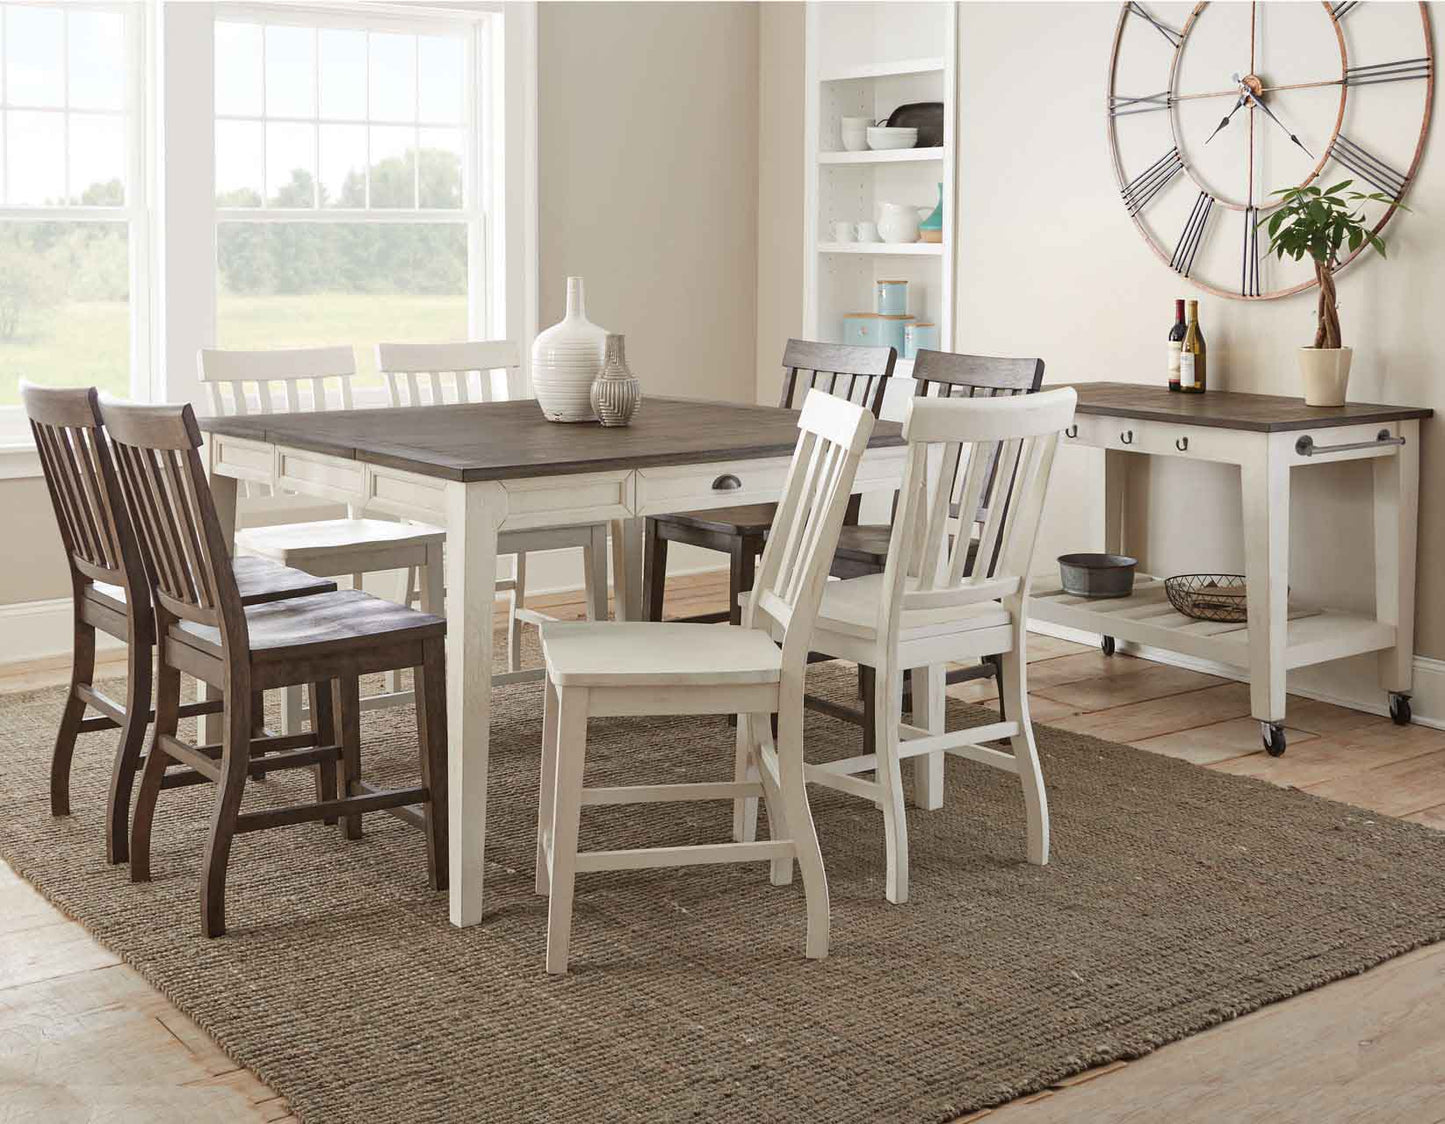 Cayla Dark Oak Counter Height Chairs (includes 2 chairs) by Steve Silver